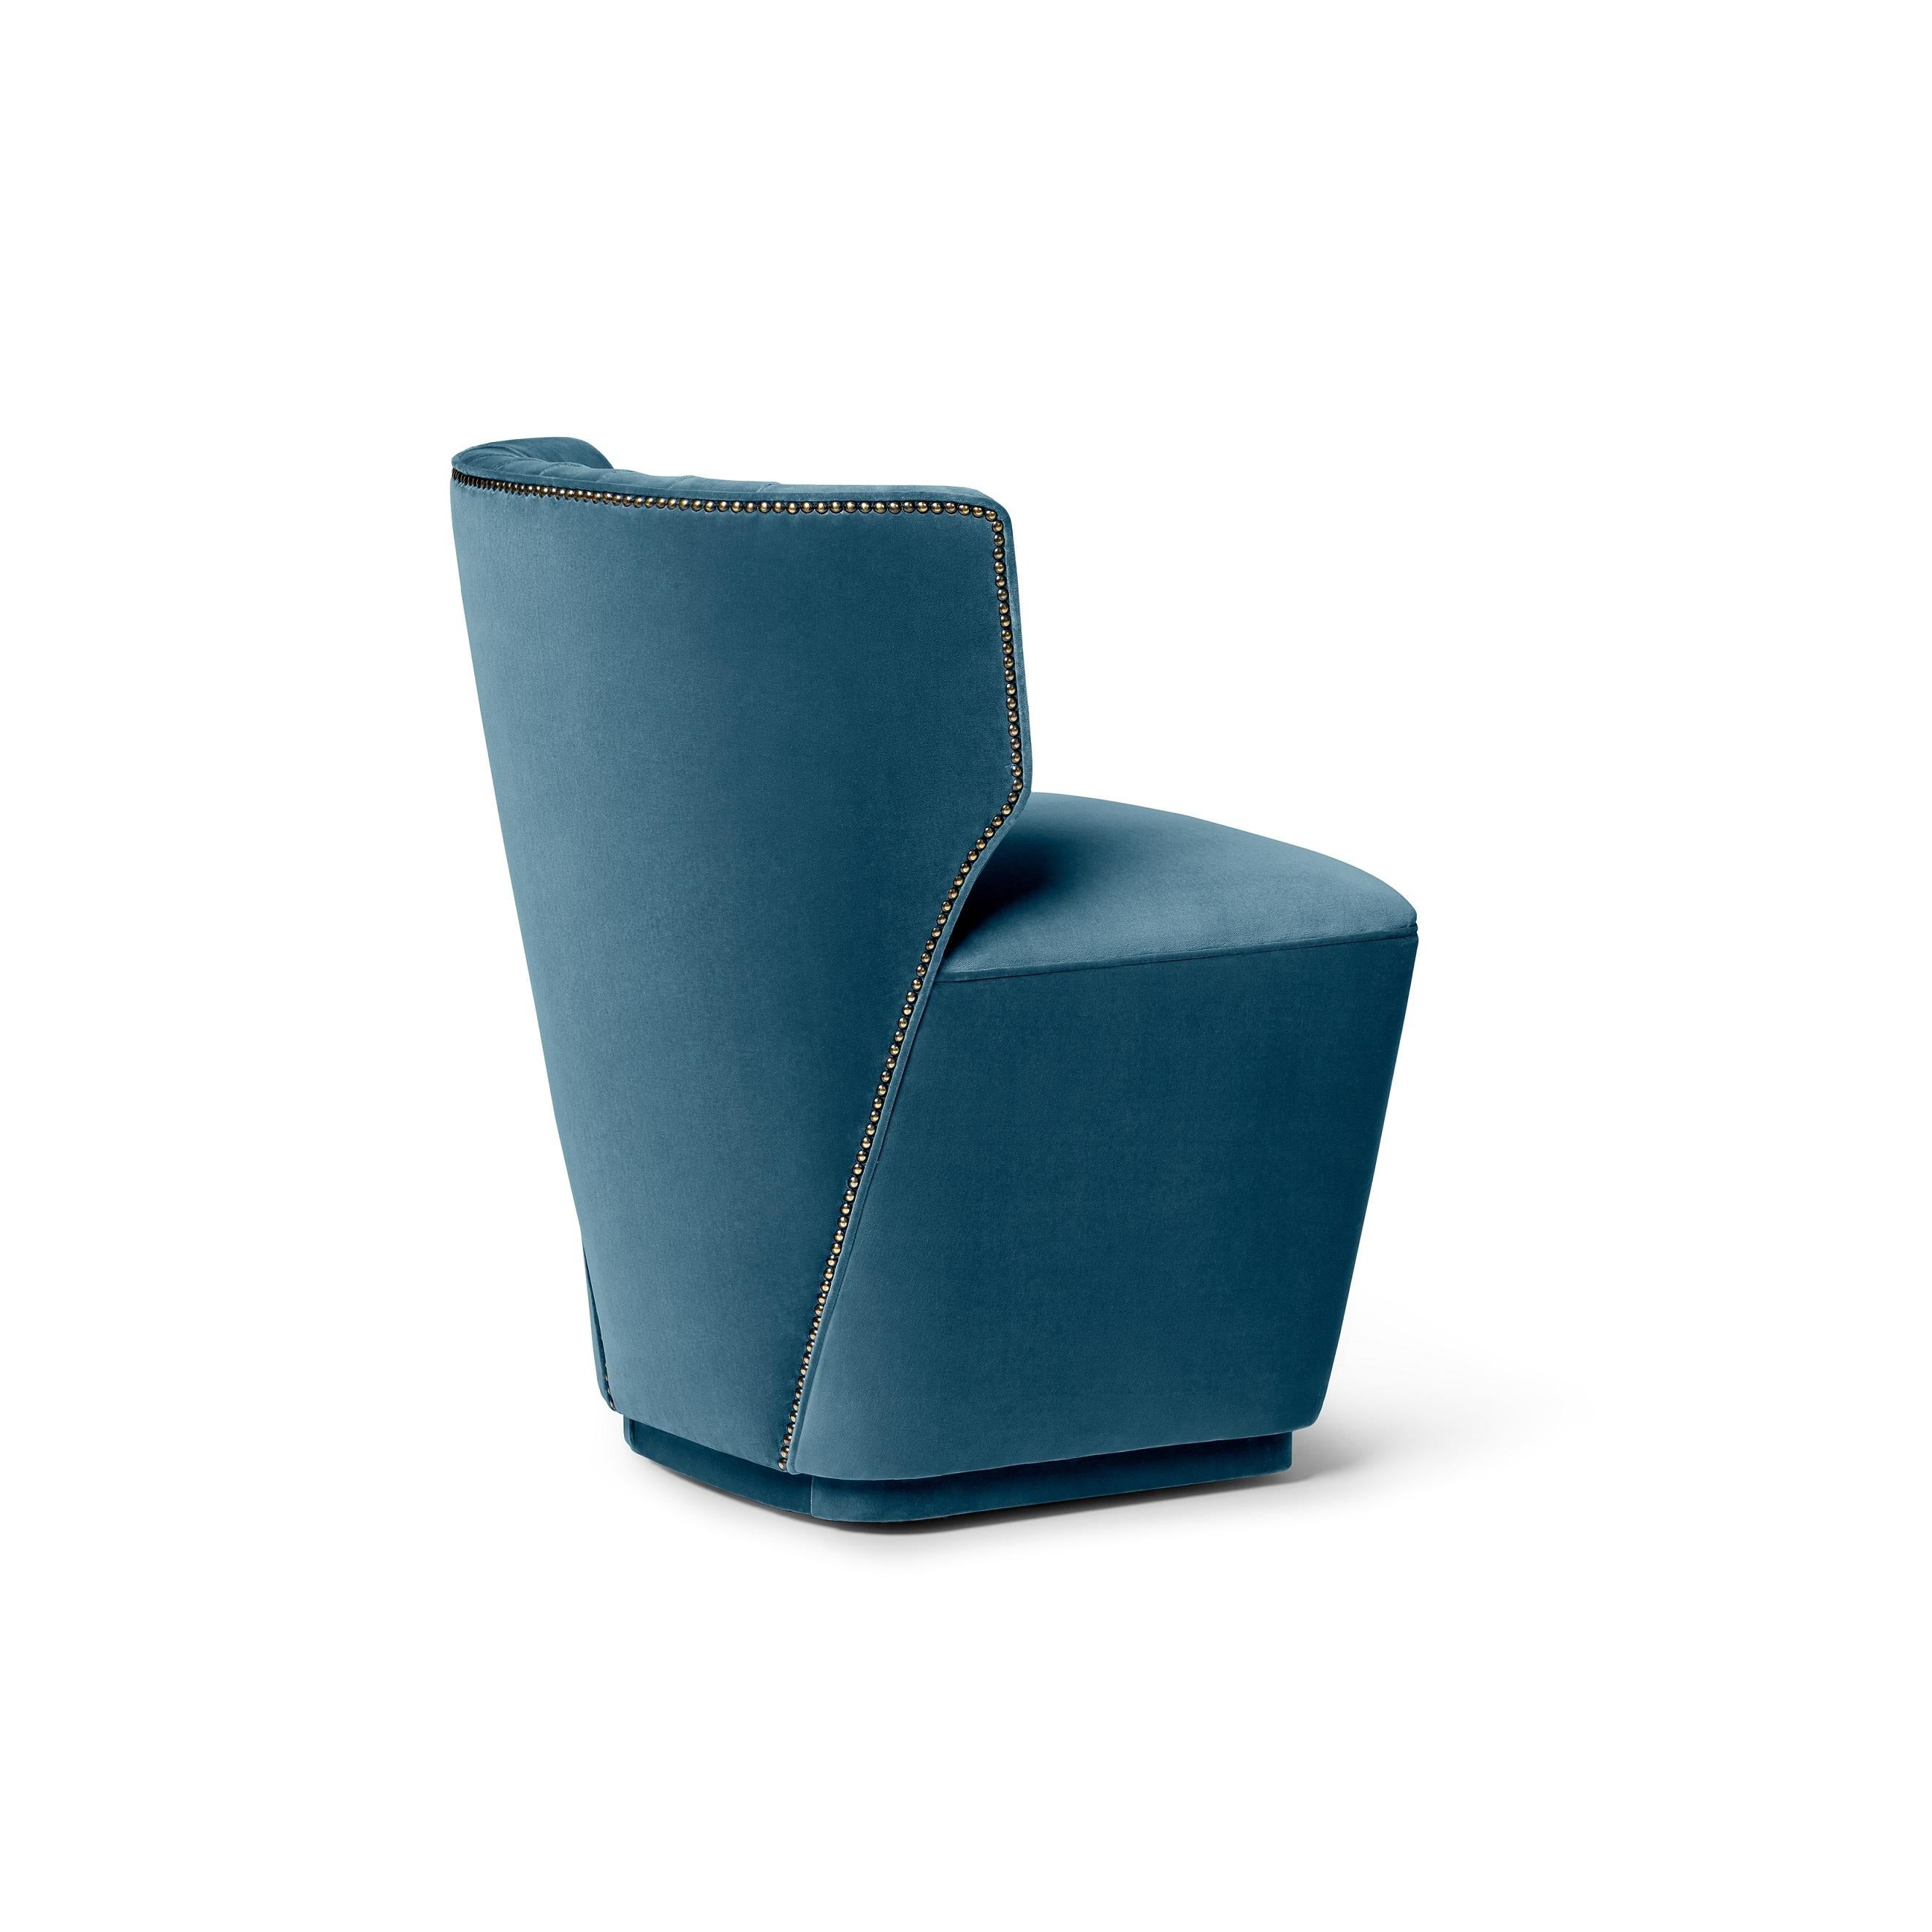 Modern Swivel Dining Chair with Seaming Details on the Back For Sale